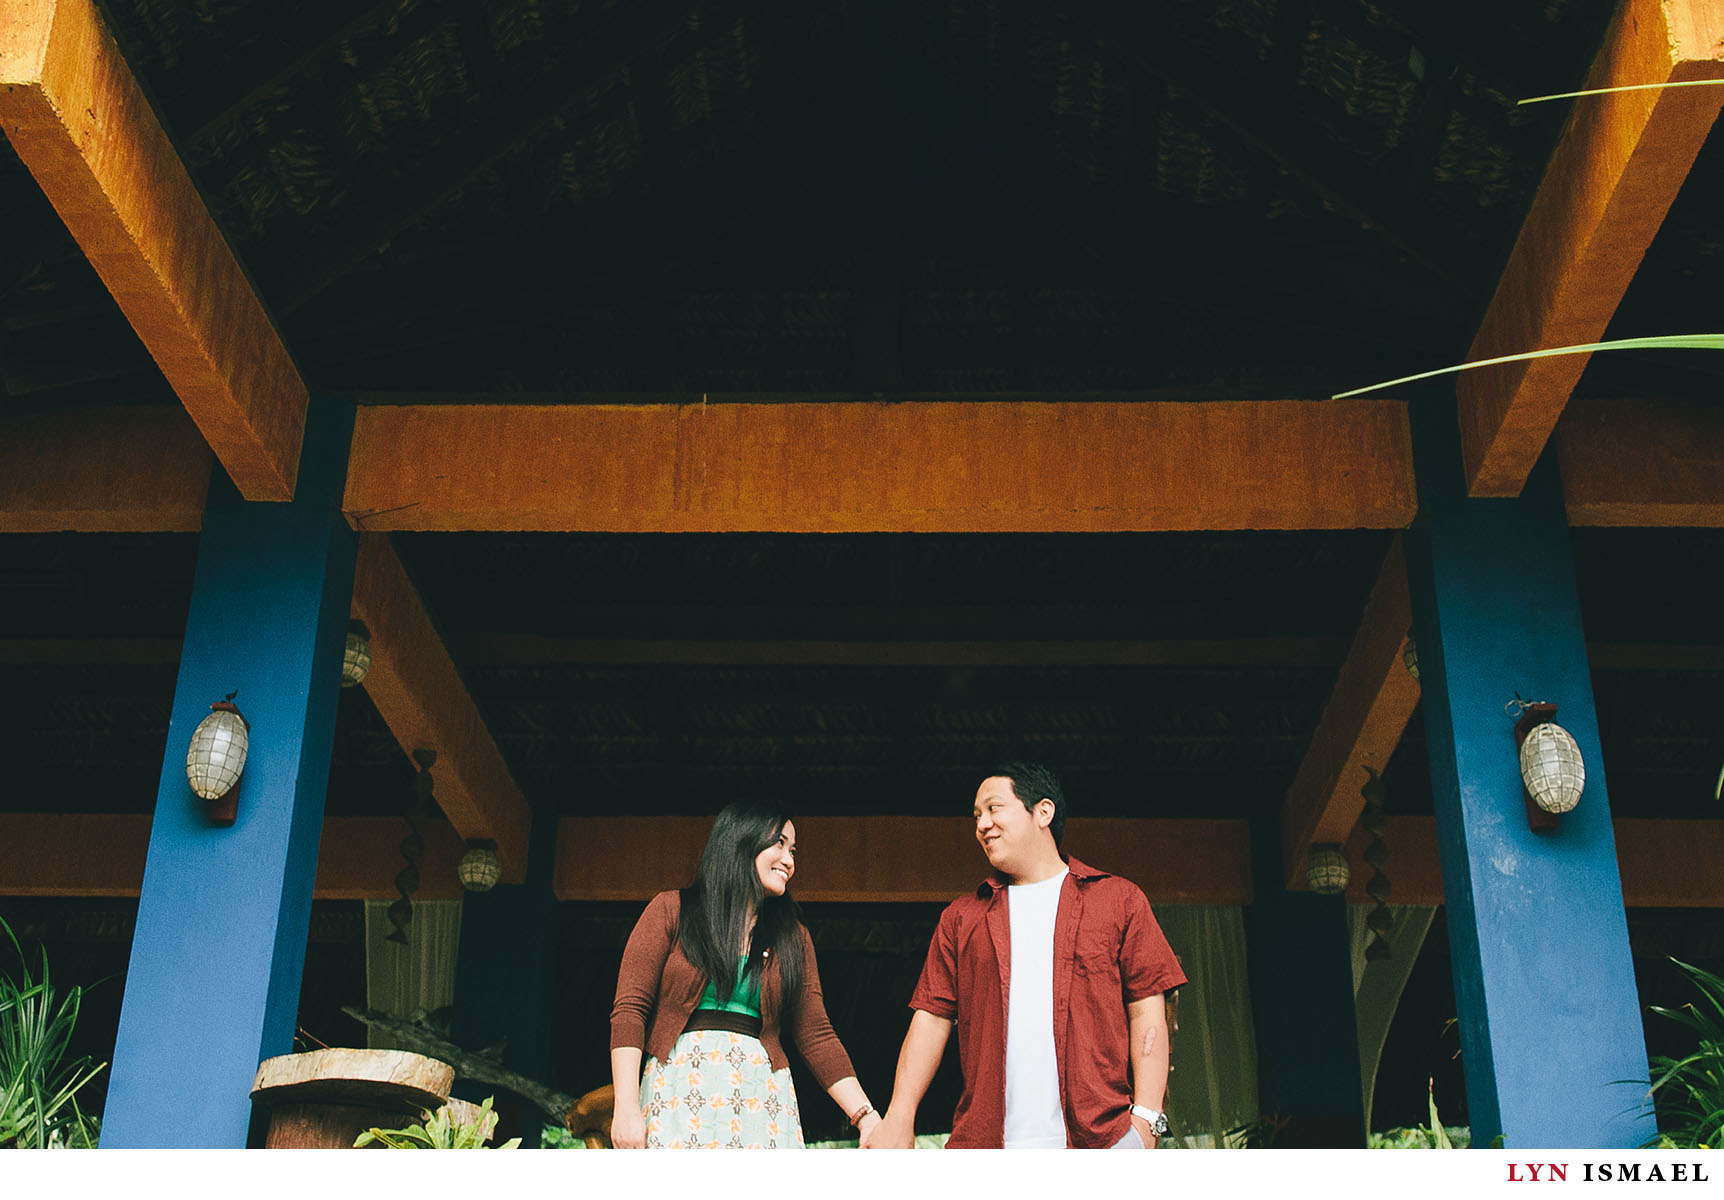 An engagement session photographed by International wedding photographer